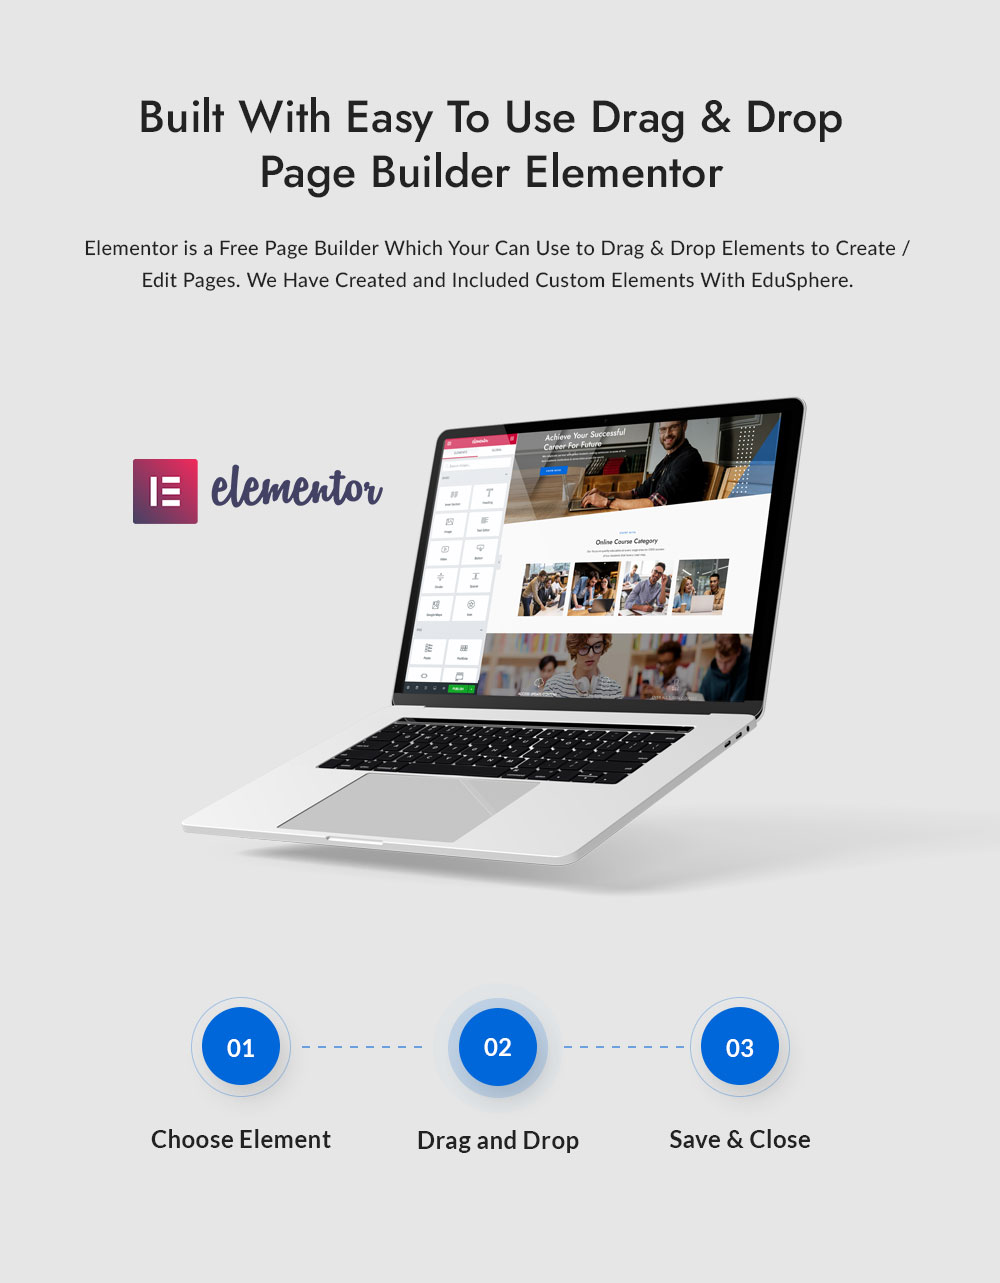 Drag and Drop Page Builder Elementor